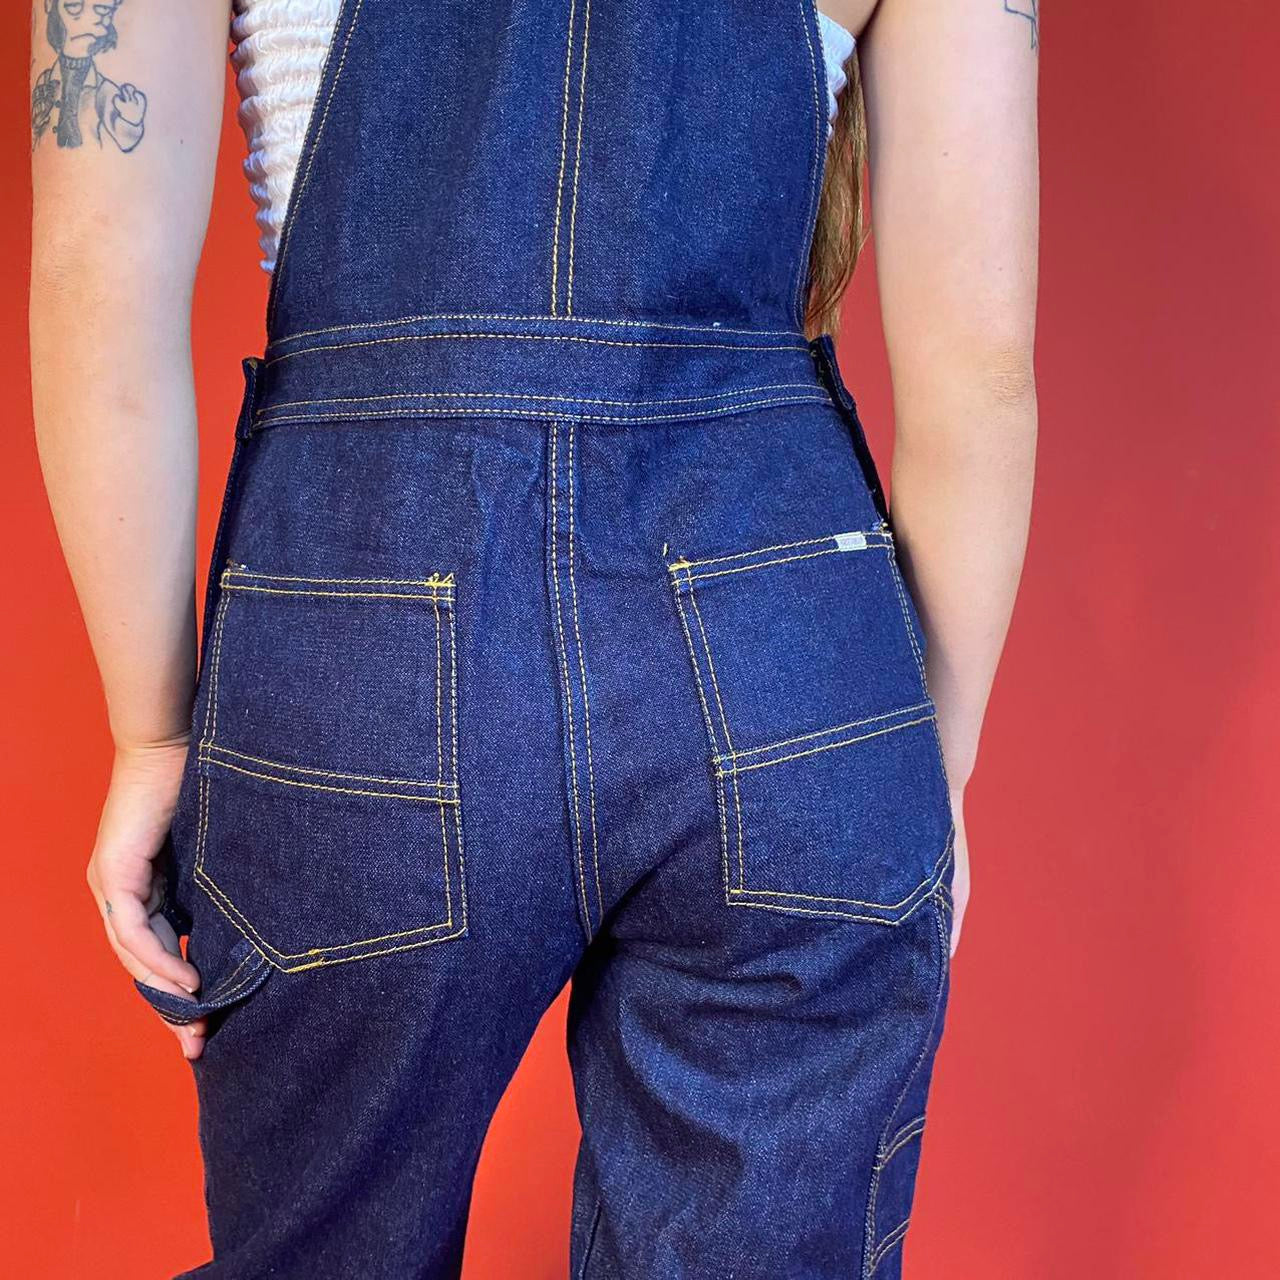 VINTAGE Deadstock 1970s Brittania Dungarees/ Overalls